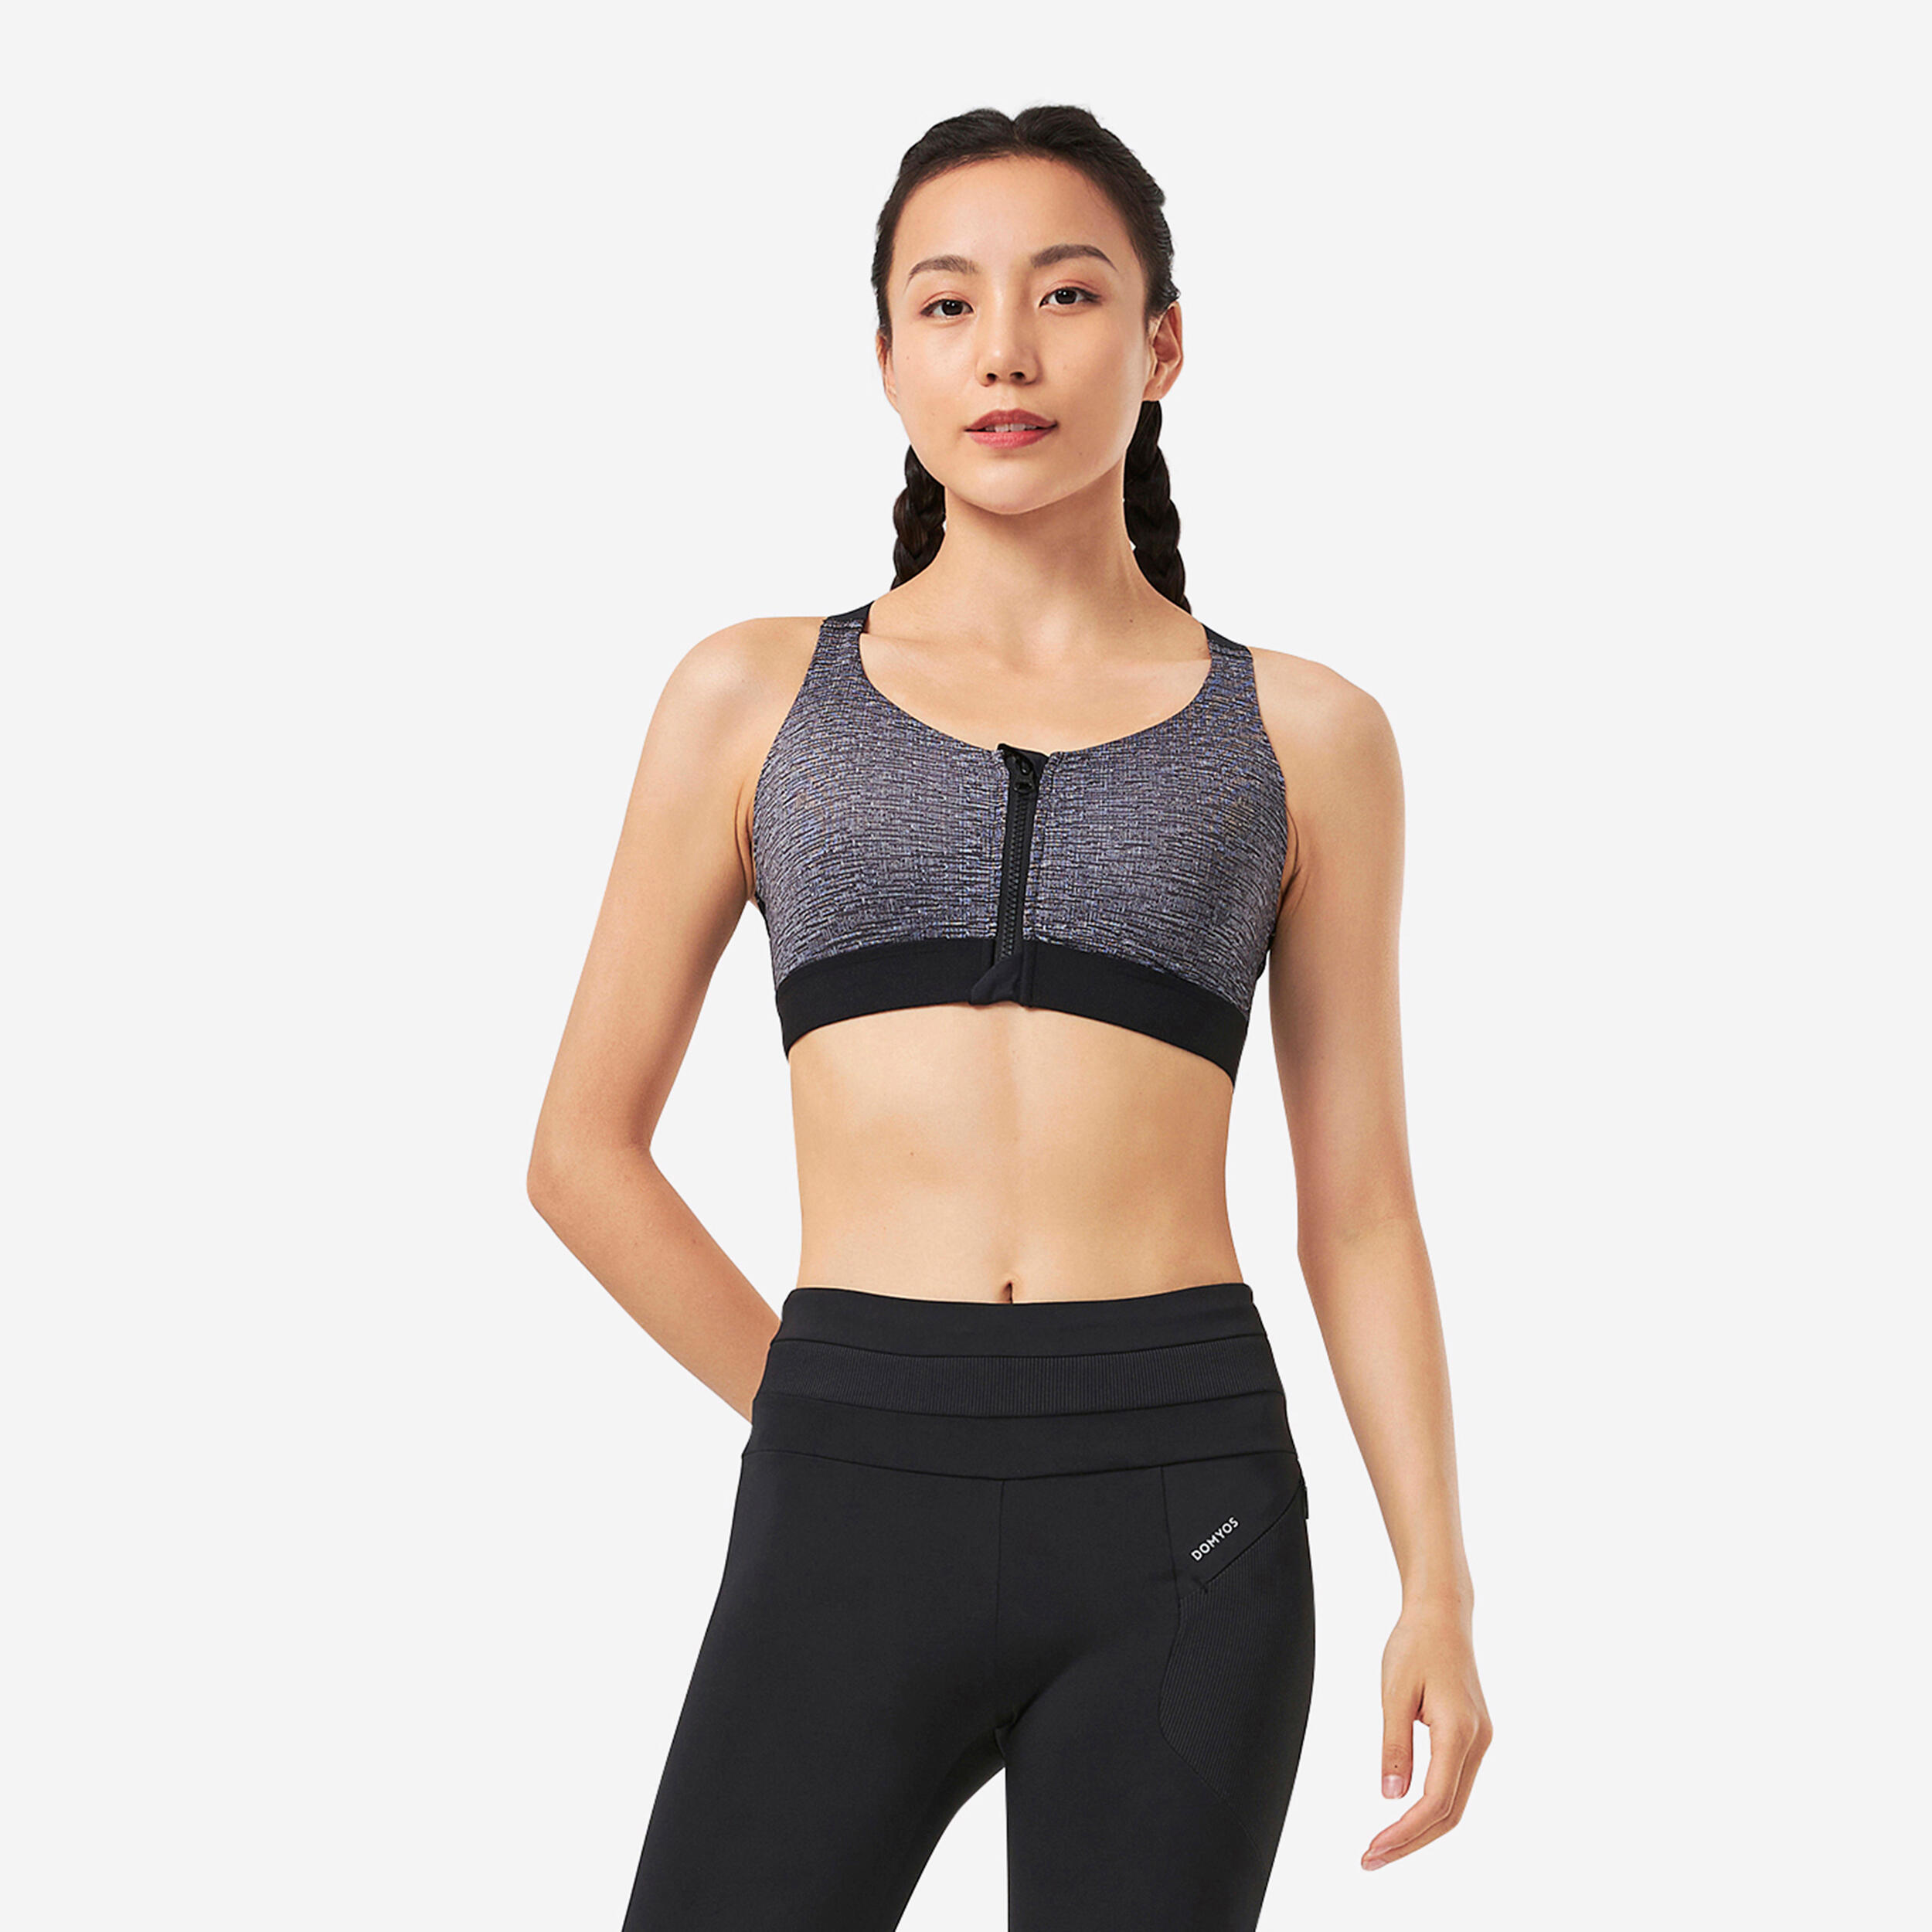 Women's High Support Zip-Up Sports Bra with Cups - Grey/Black 1/5